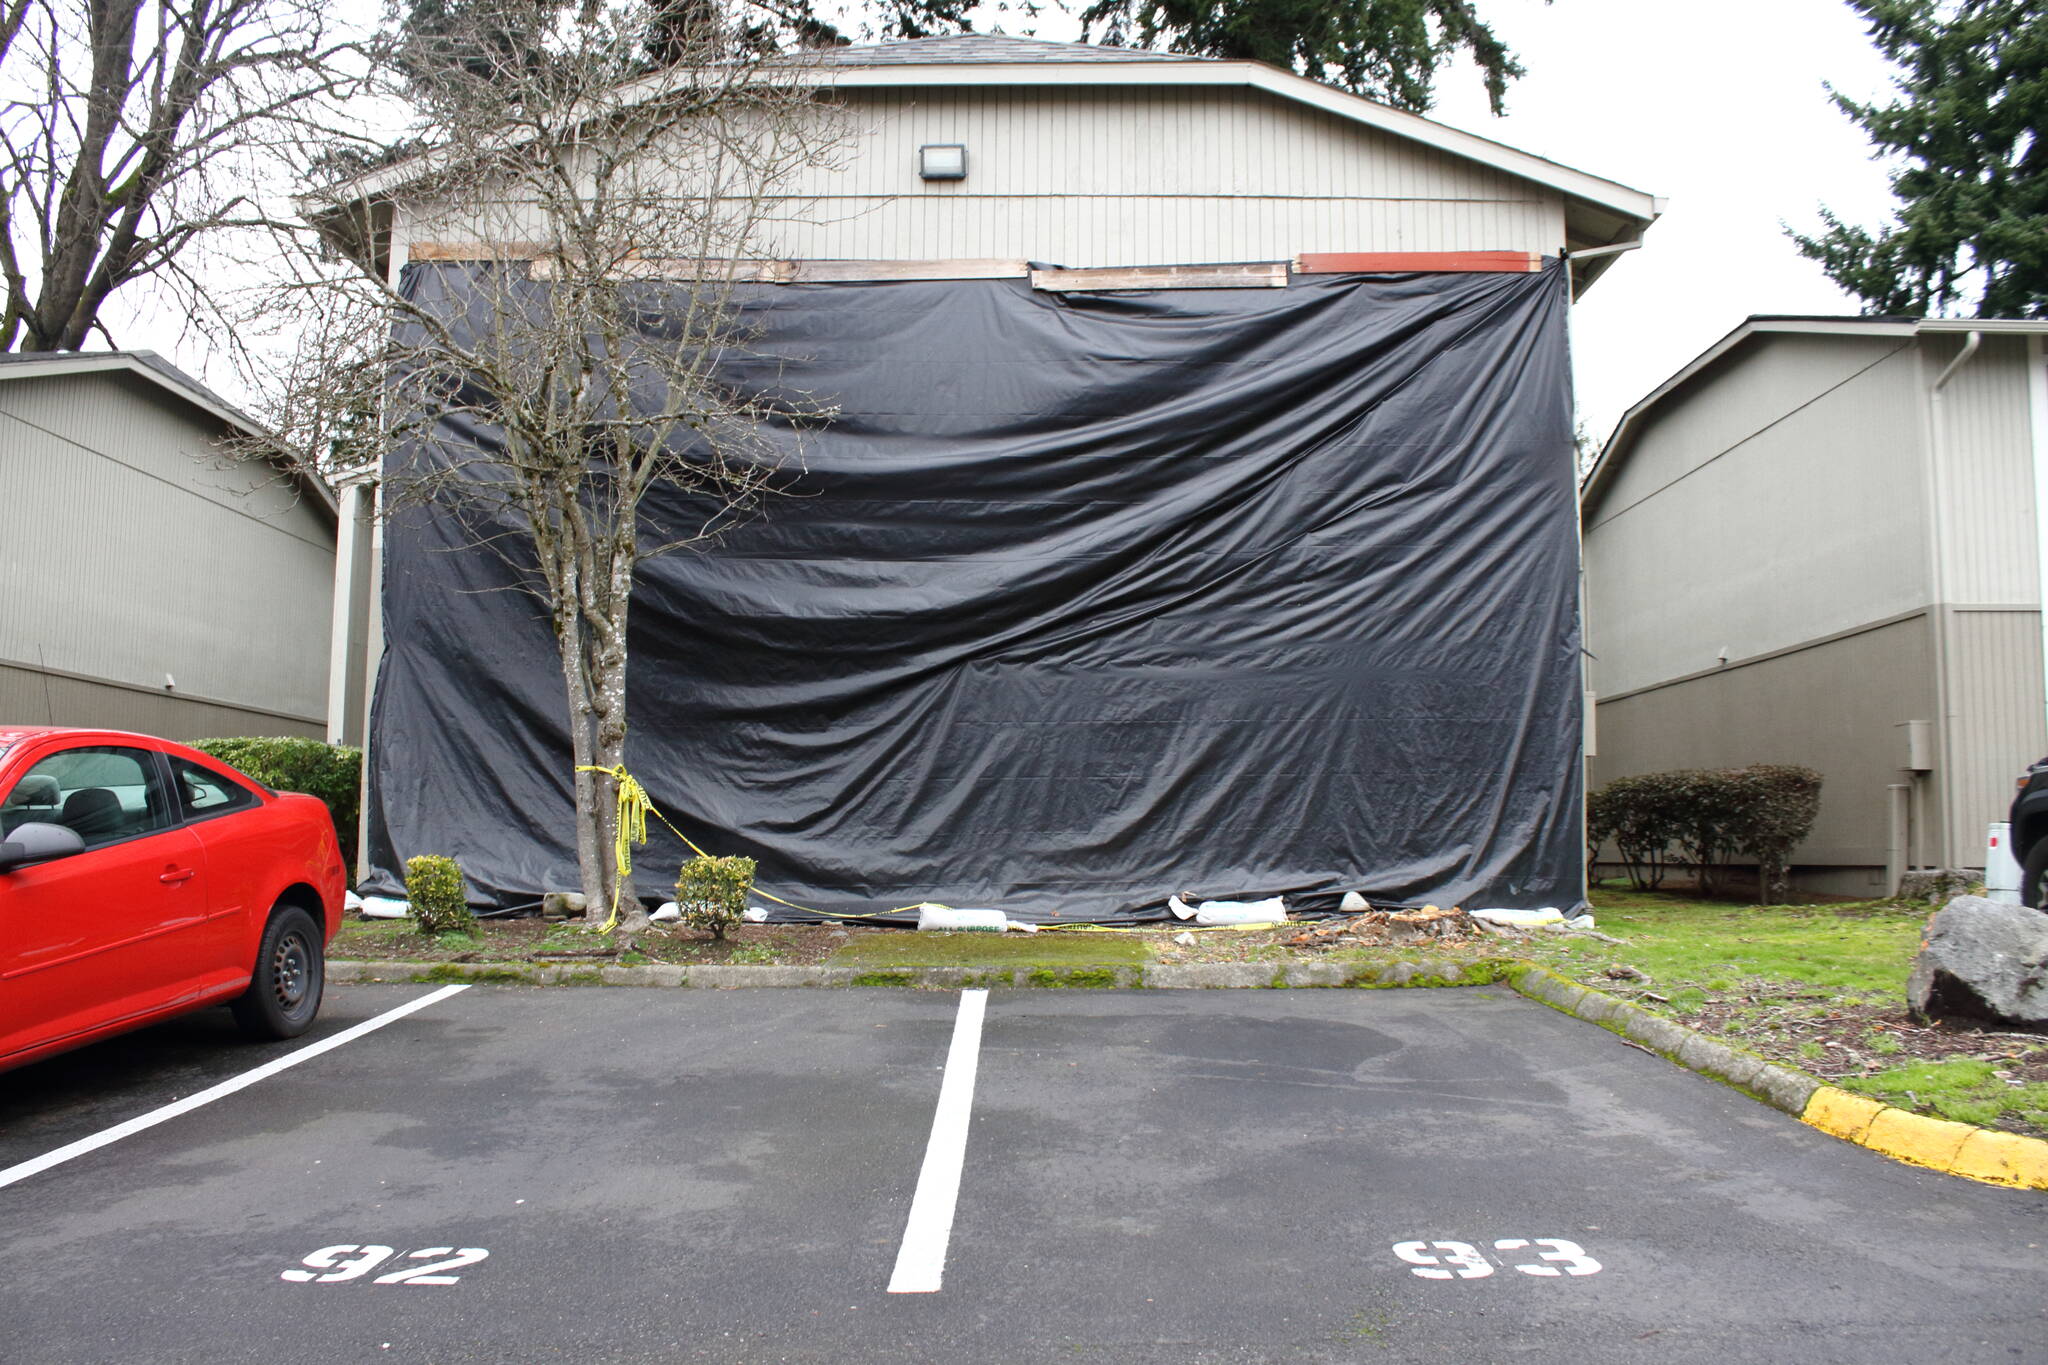 One apartment building in the large Miro apartment complex is covered by a black tarp for an unknown reason. At least 10 other buildings have similar tarps over roofs. (Photo by Keelin Everly-Lang/The Mirror)